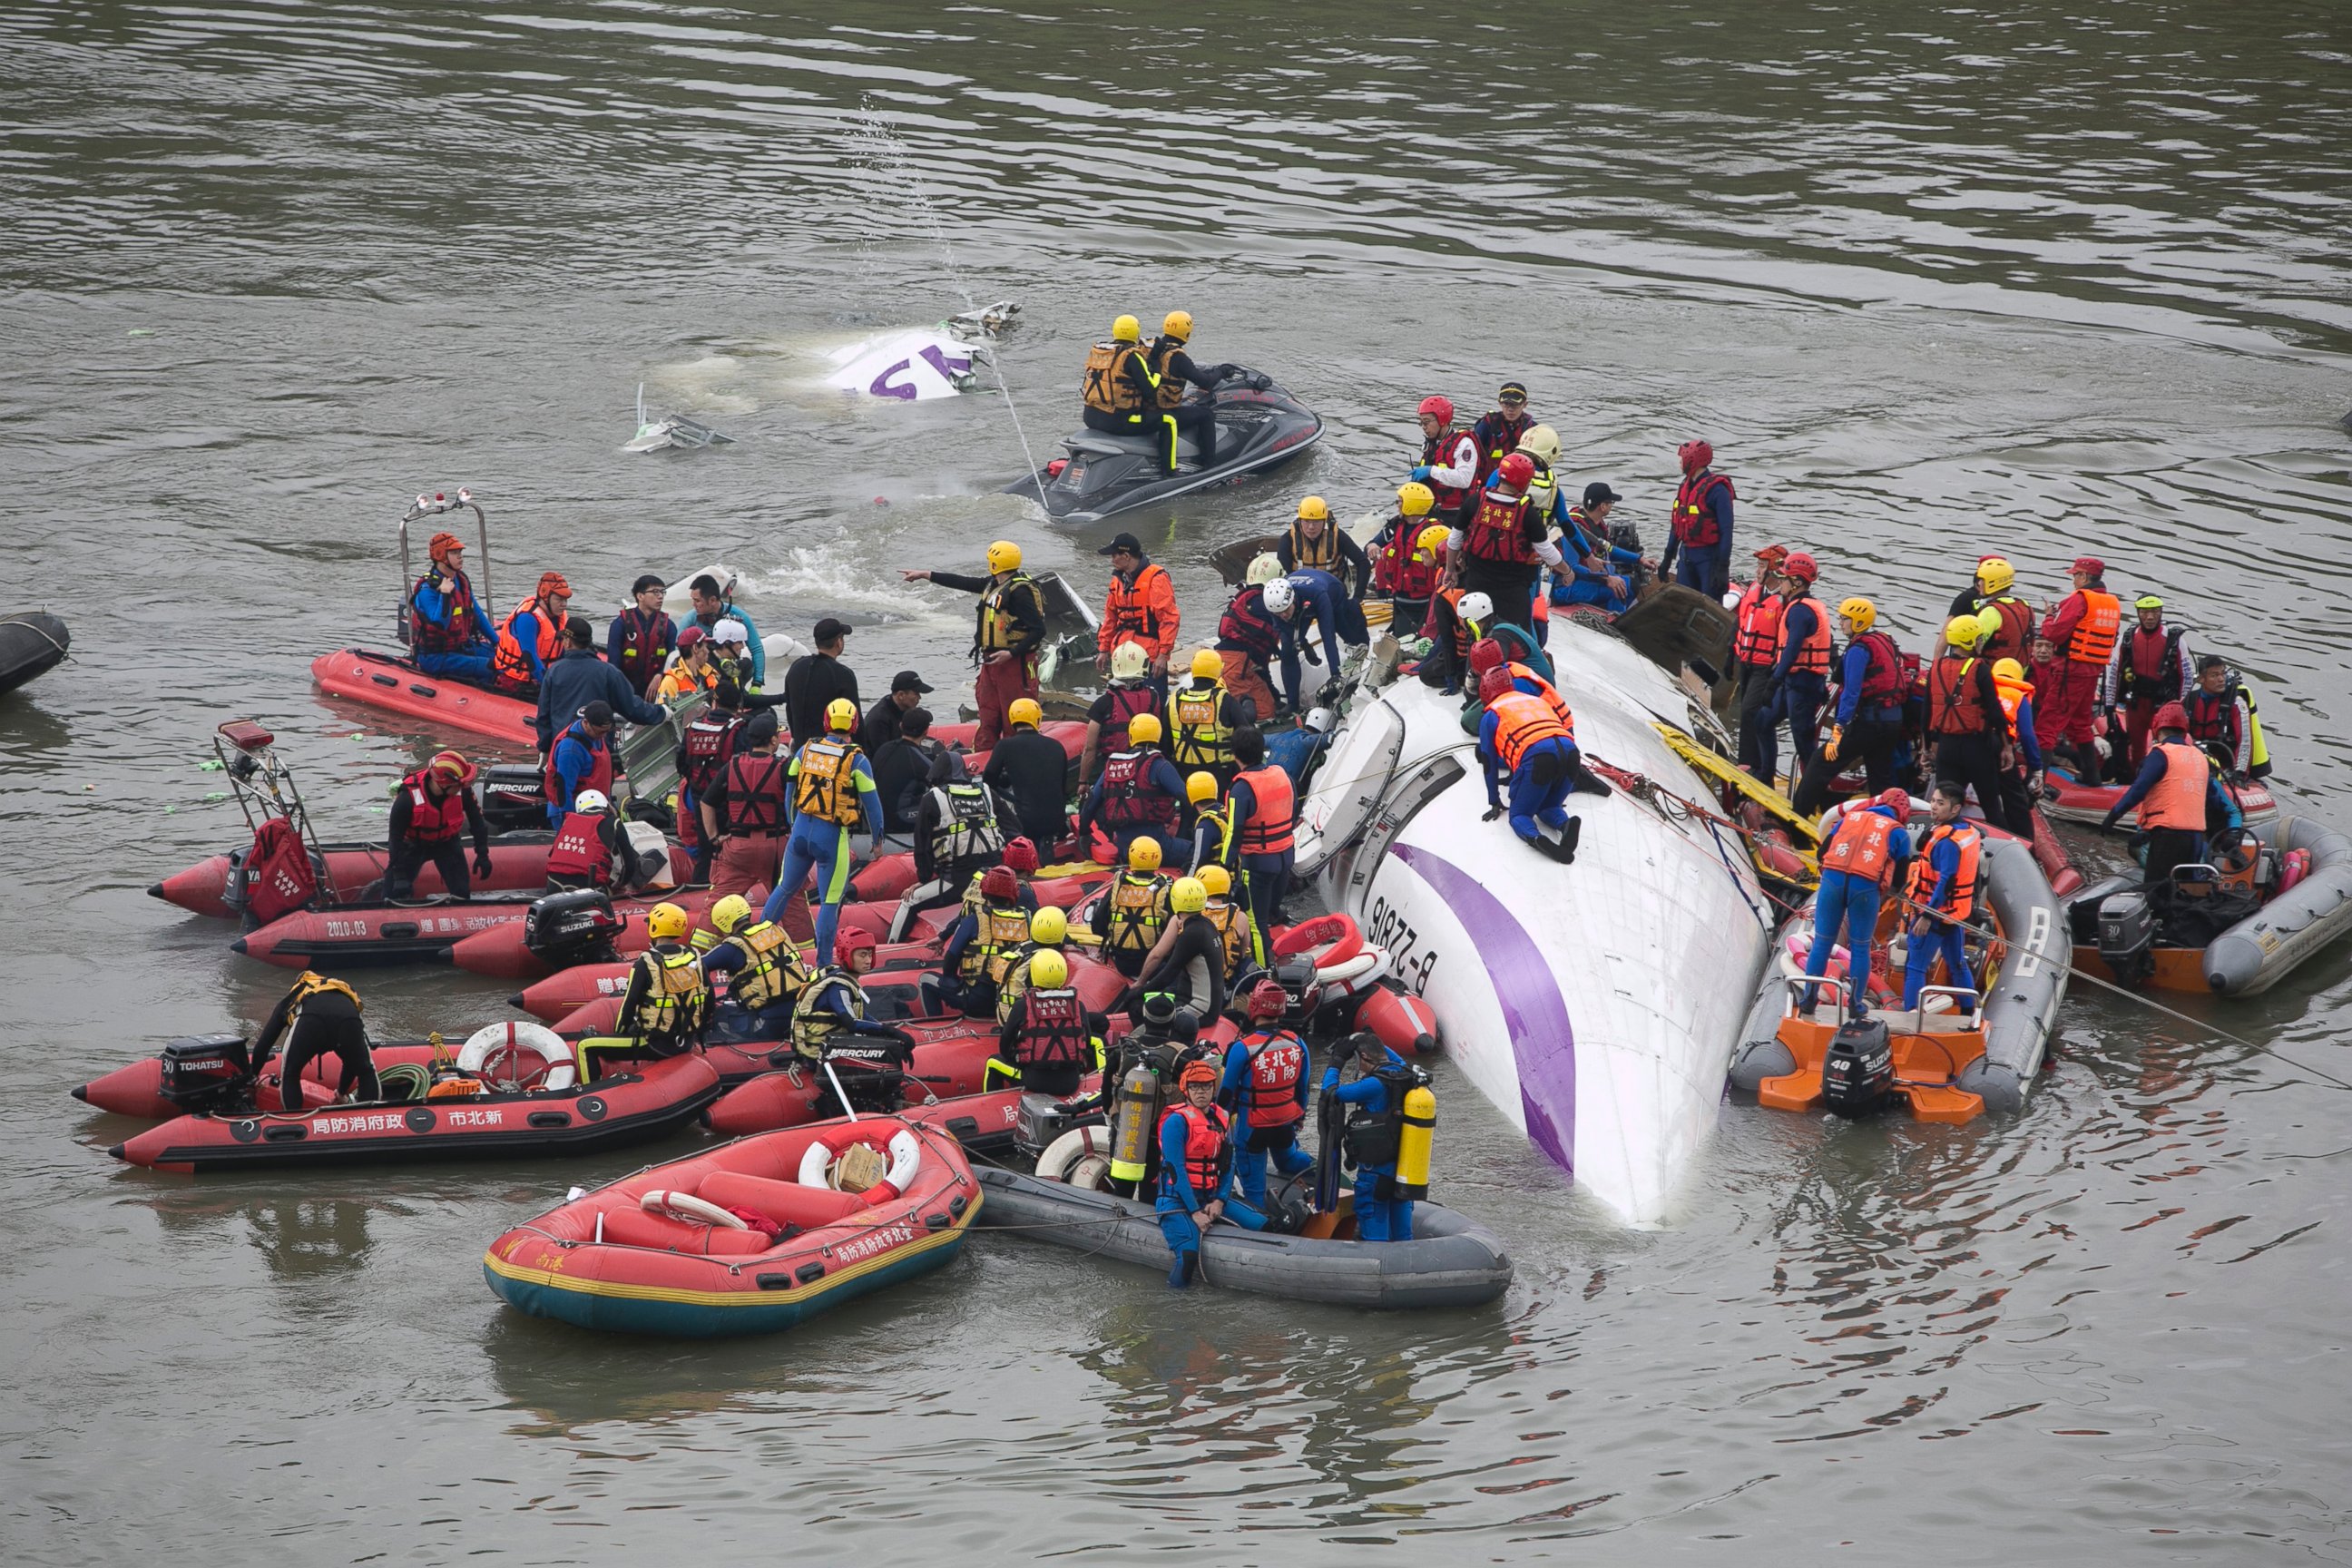 PHOTO: Rescue teams work to free people from a TransAsia Airways ATR 72-600 turboprop airplane that crashed into the Keelung River shortly after takeoff from Taipei Songshan Airport on Feb. 4, 2015 in Taipei, Taiwan. 